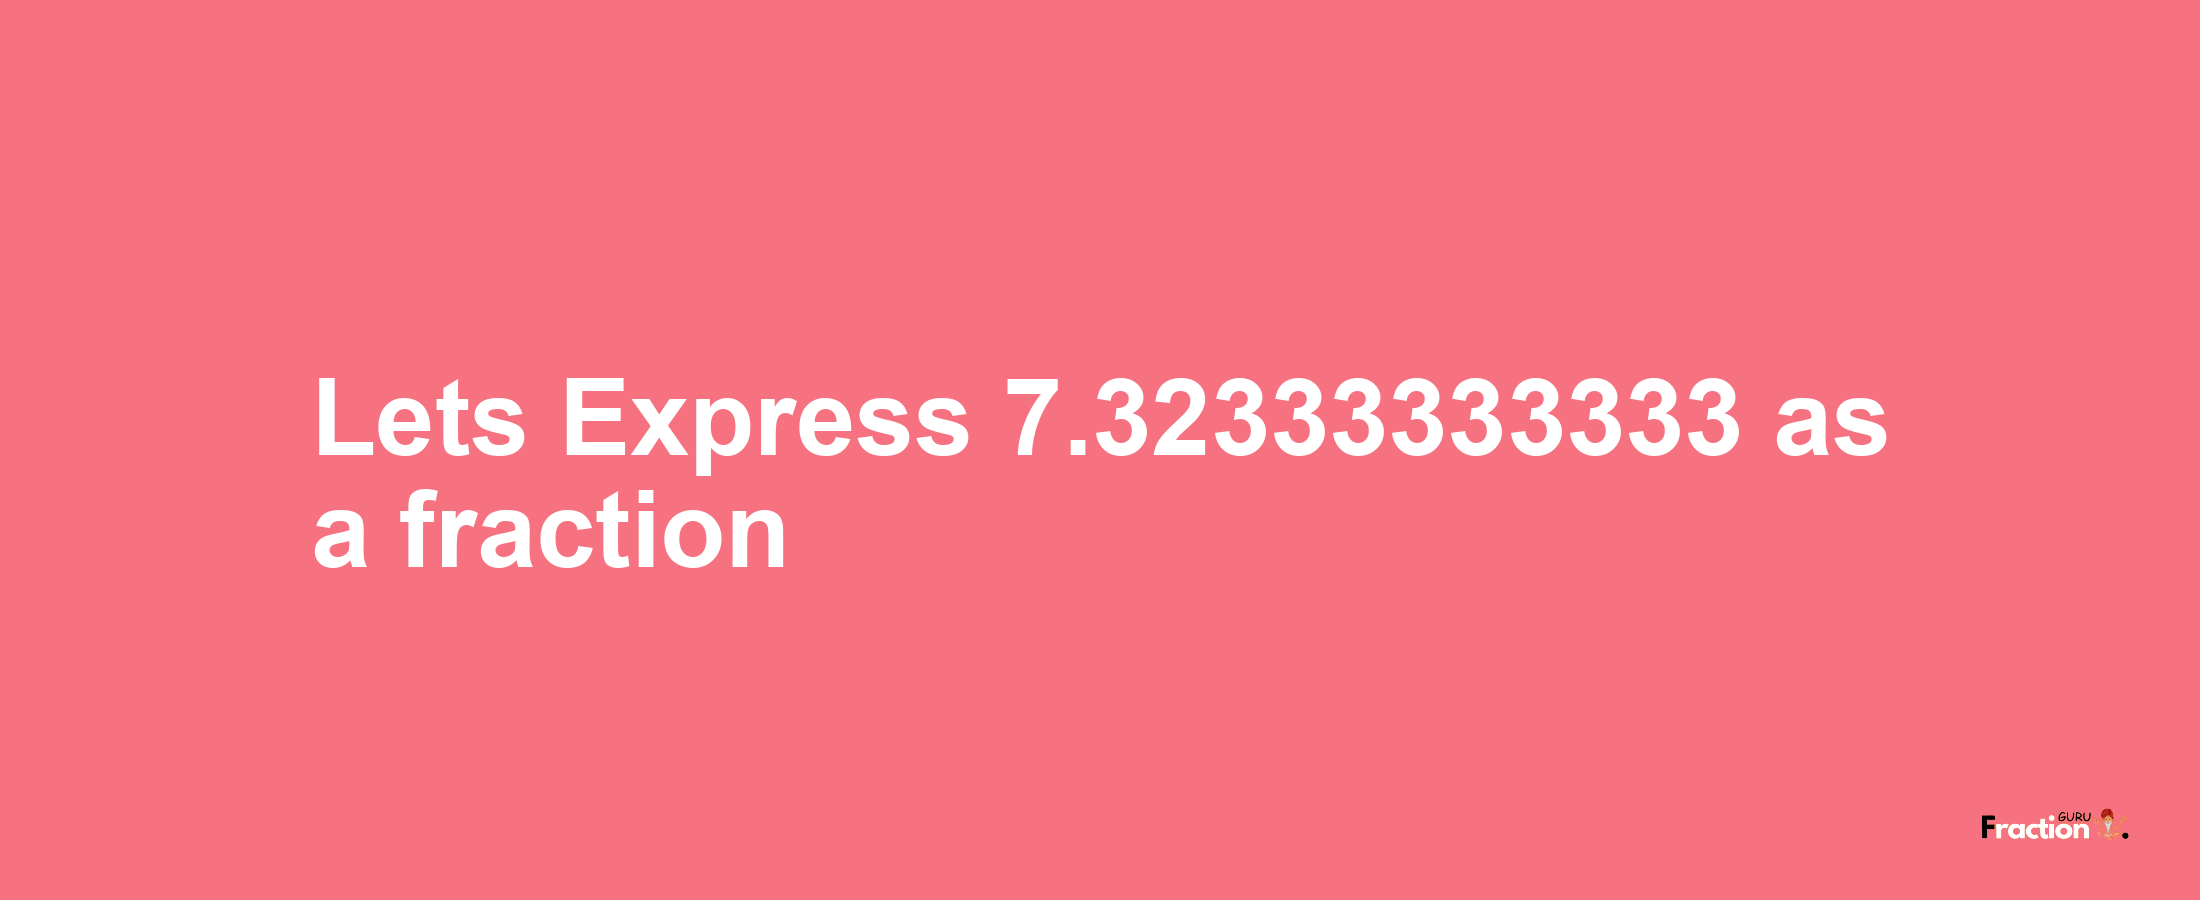 Lets Express 7.32333333333 as afraction